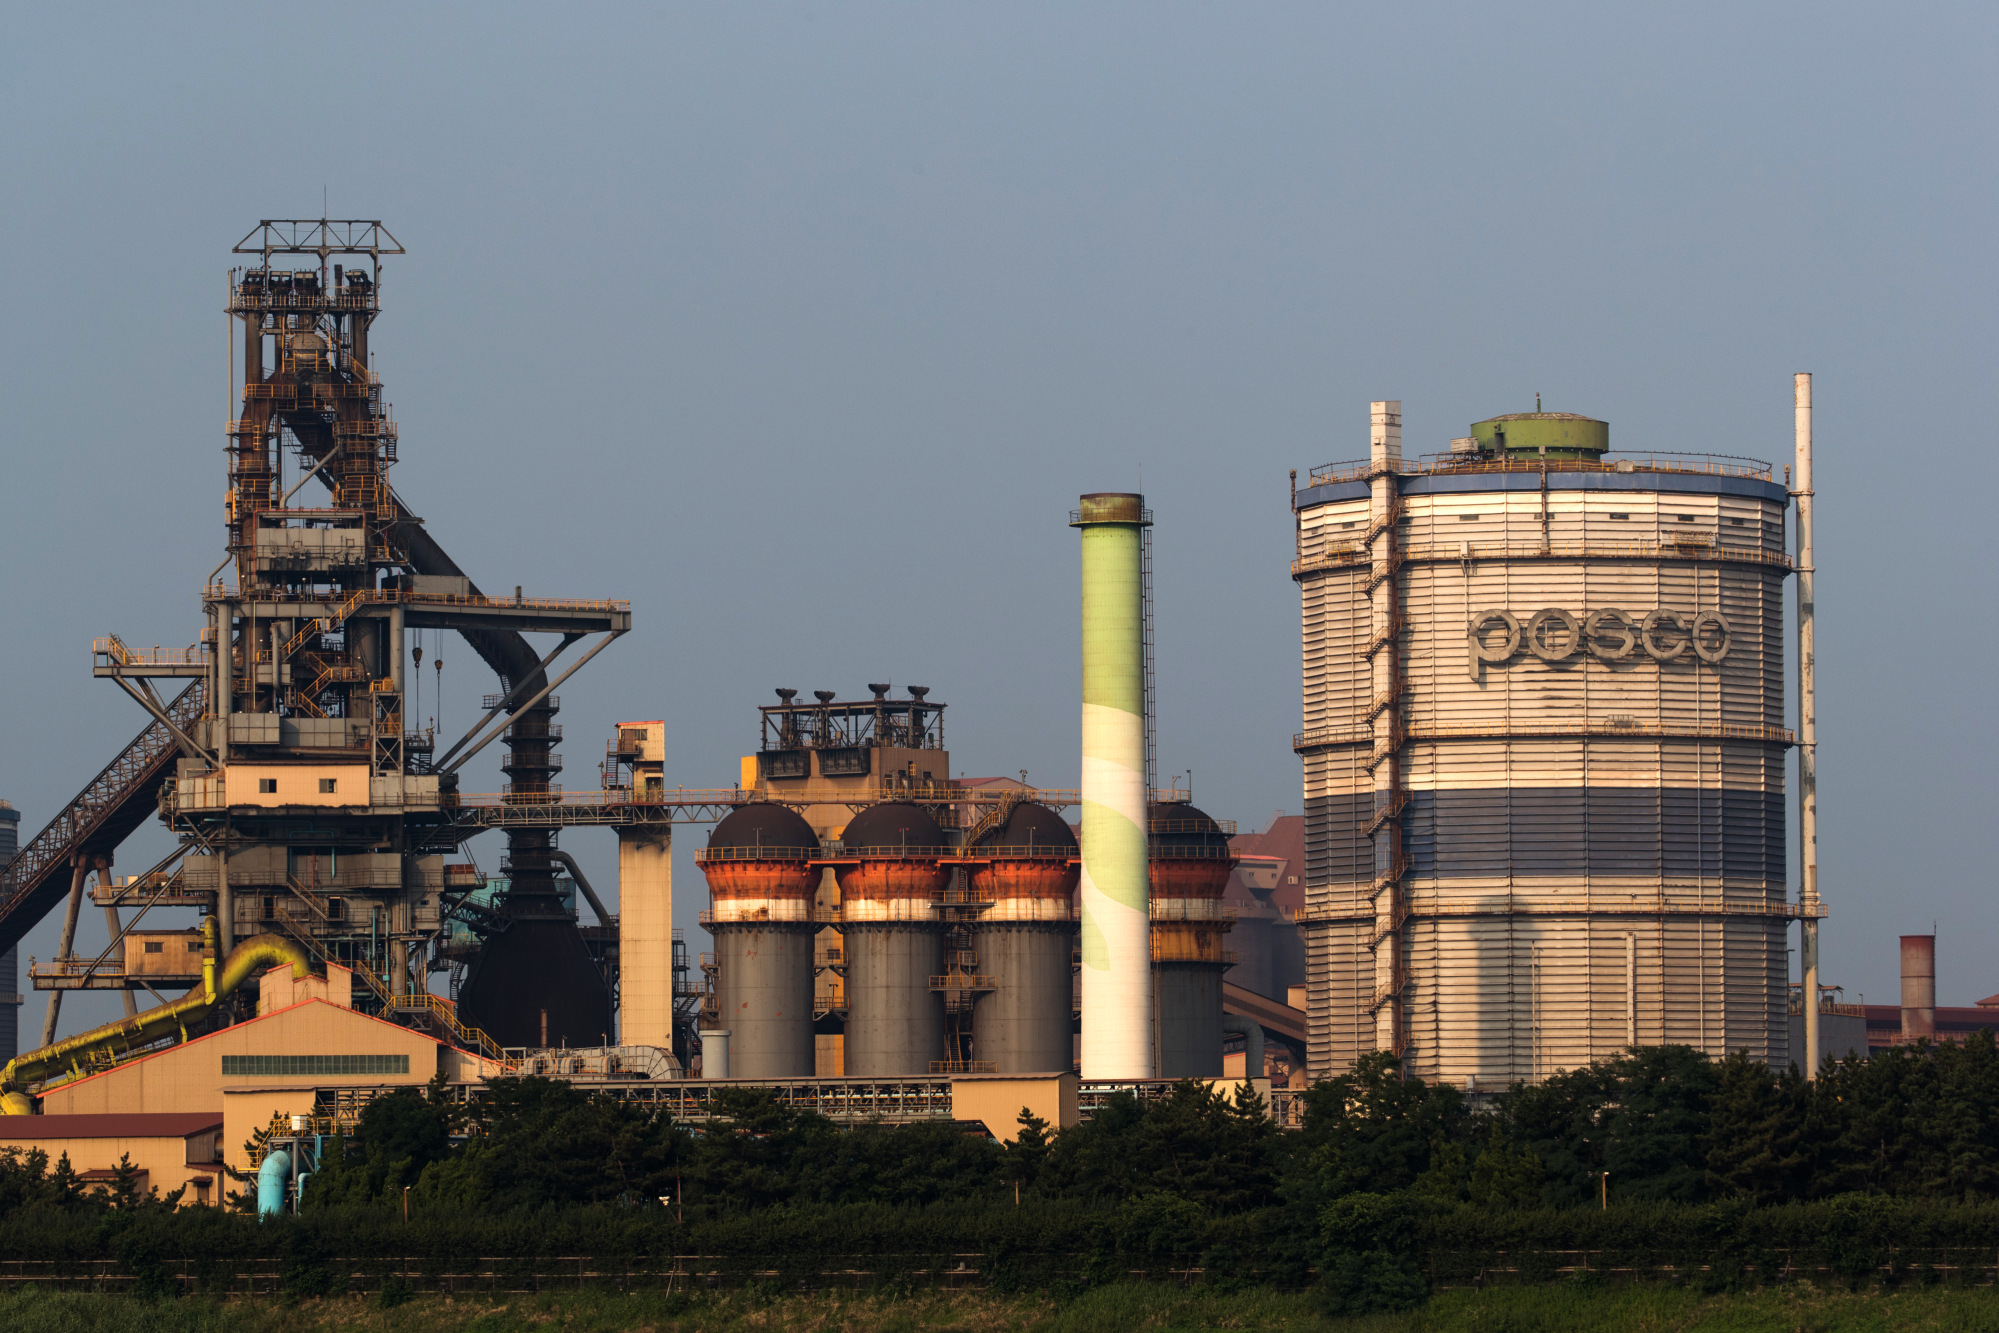 POSCO Looks Cheap, Even Factoring In Risks (NYSE:PKX)